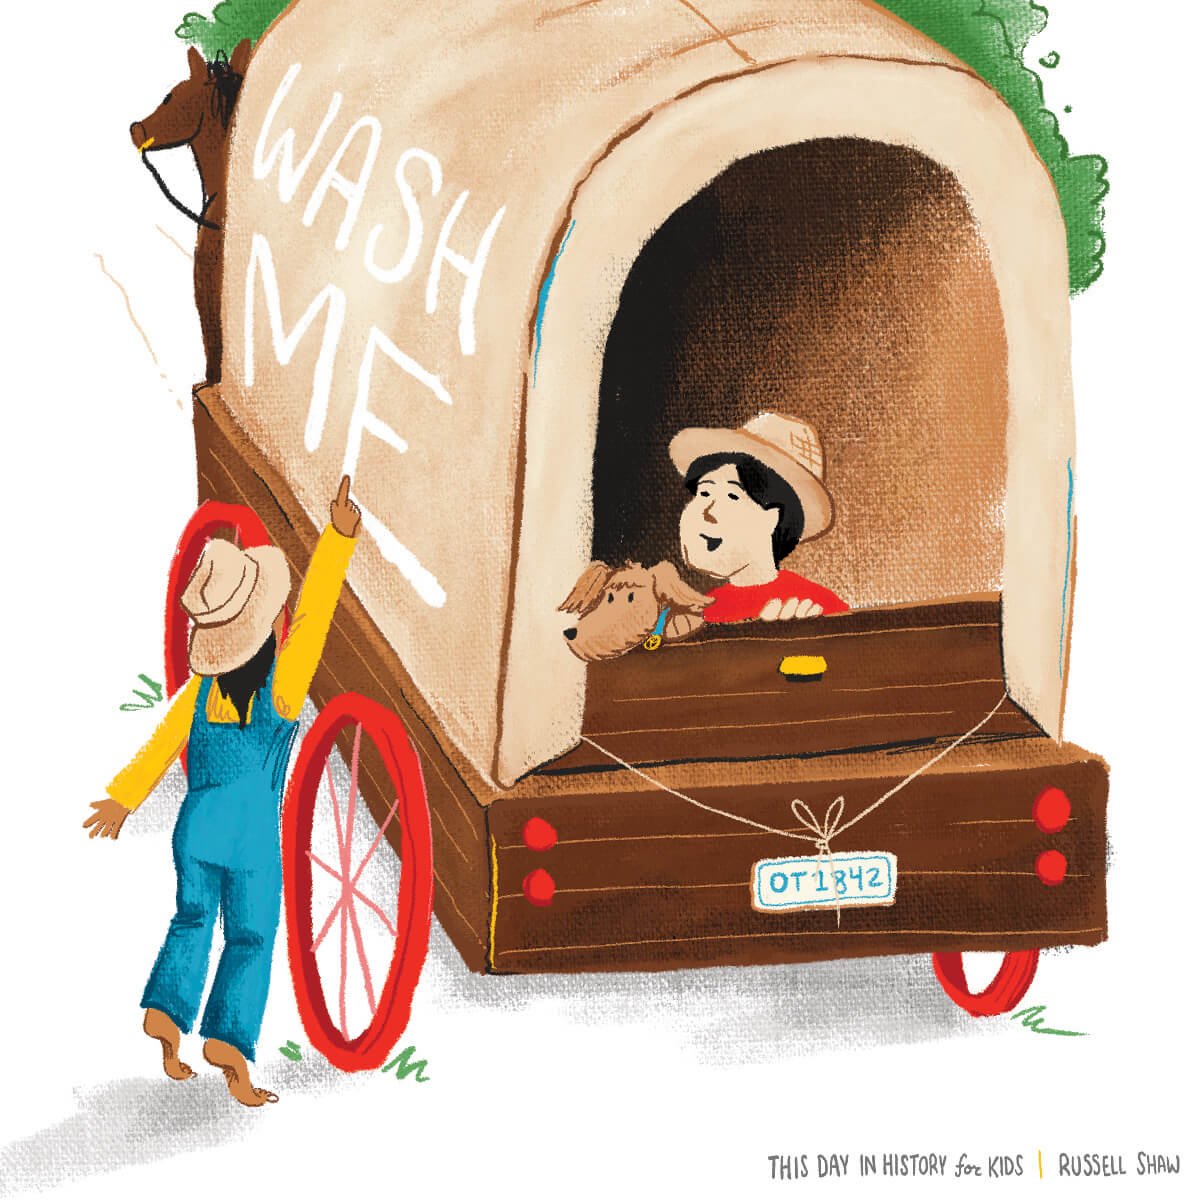  A child and their pup sit in the back of an old covered wagon on the Oregon trail, with "wash me" scrawled on the side by a friend. 